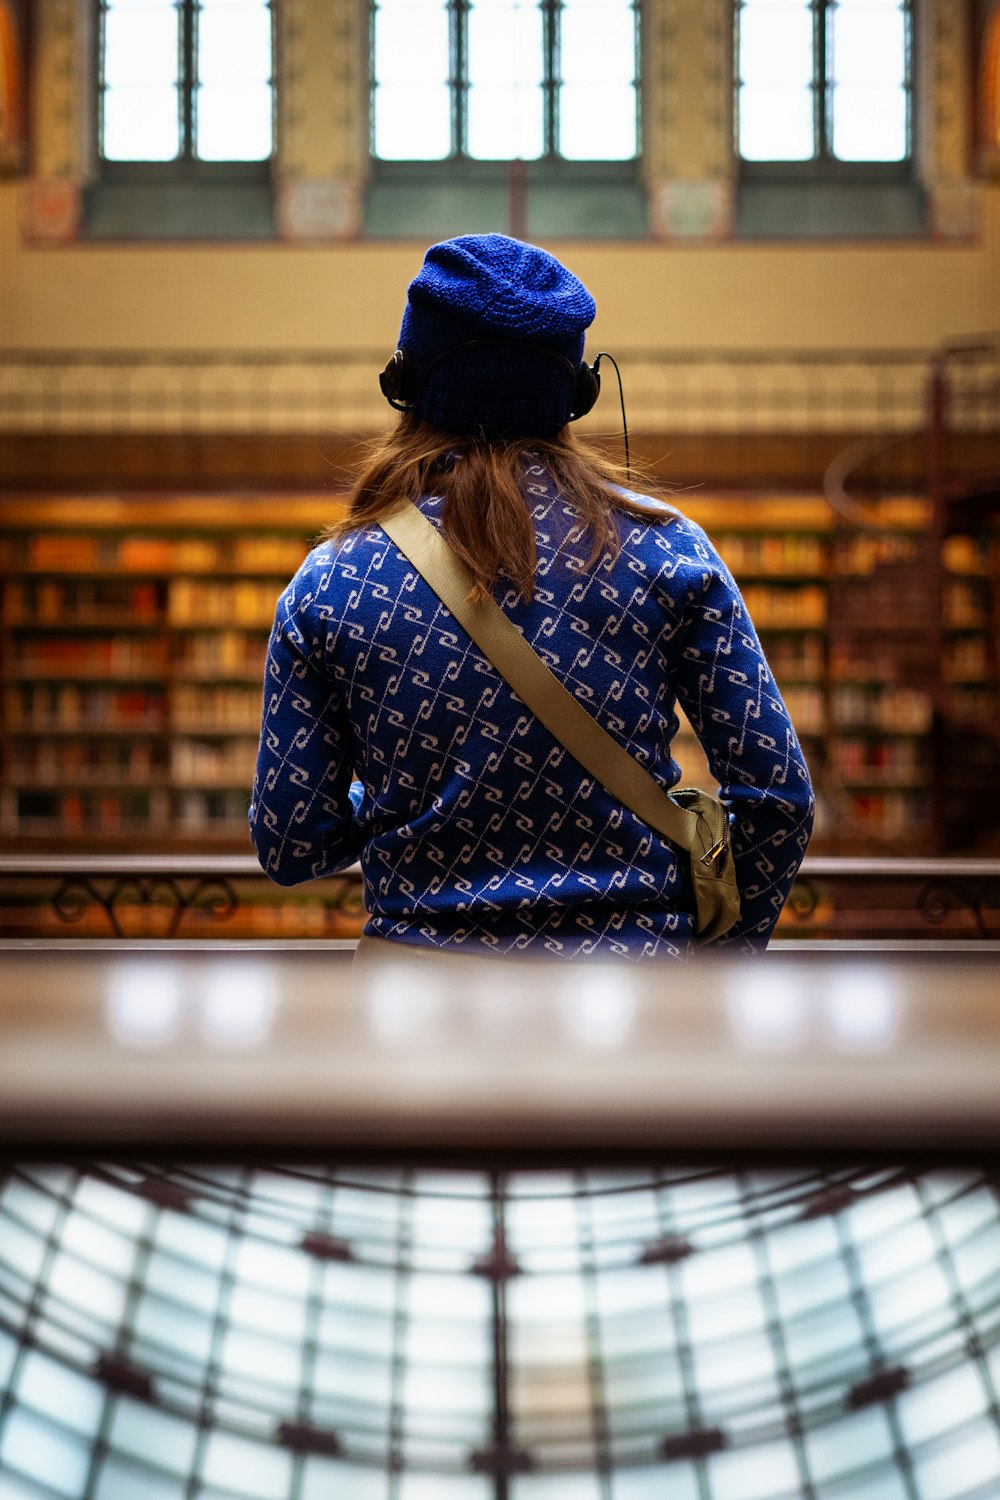 a woman with a blue hat is looking at a book shelf